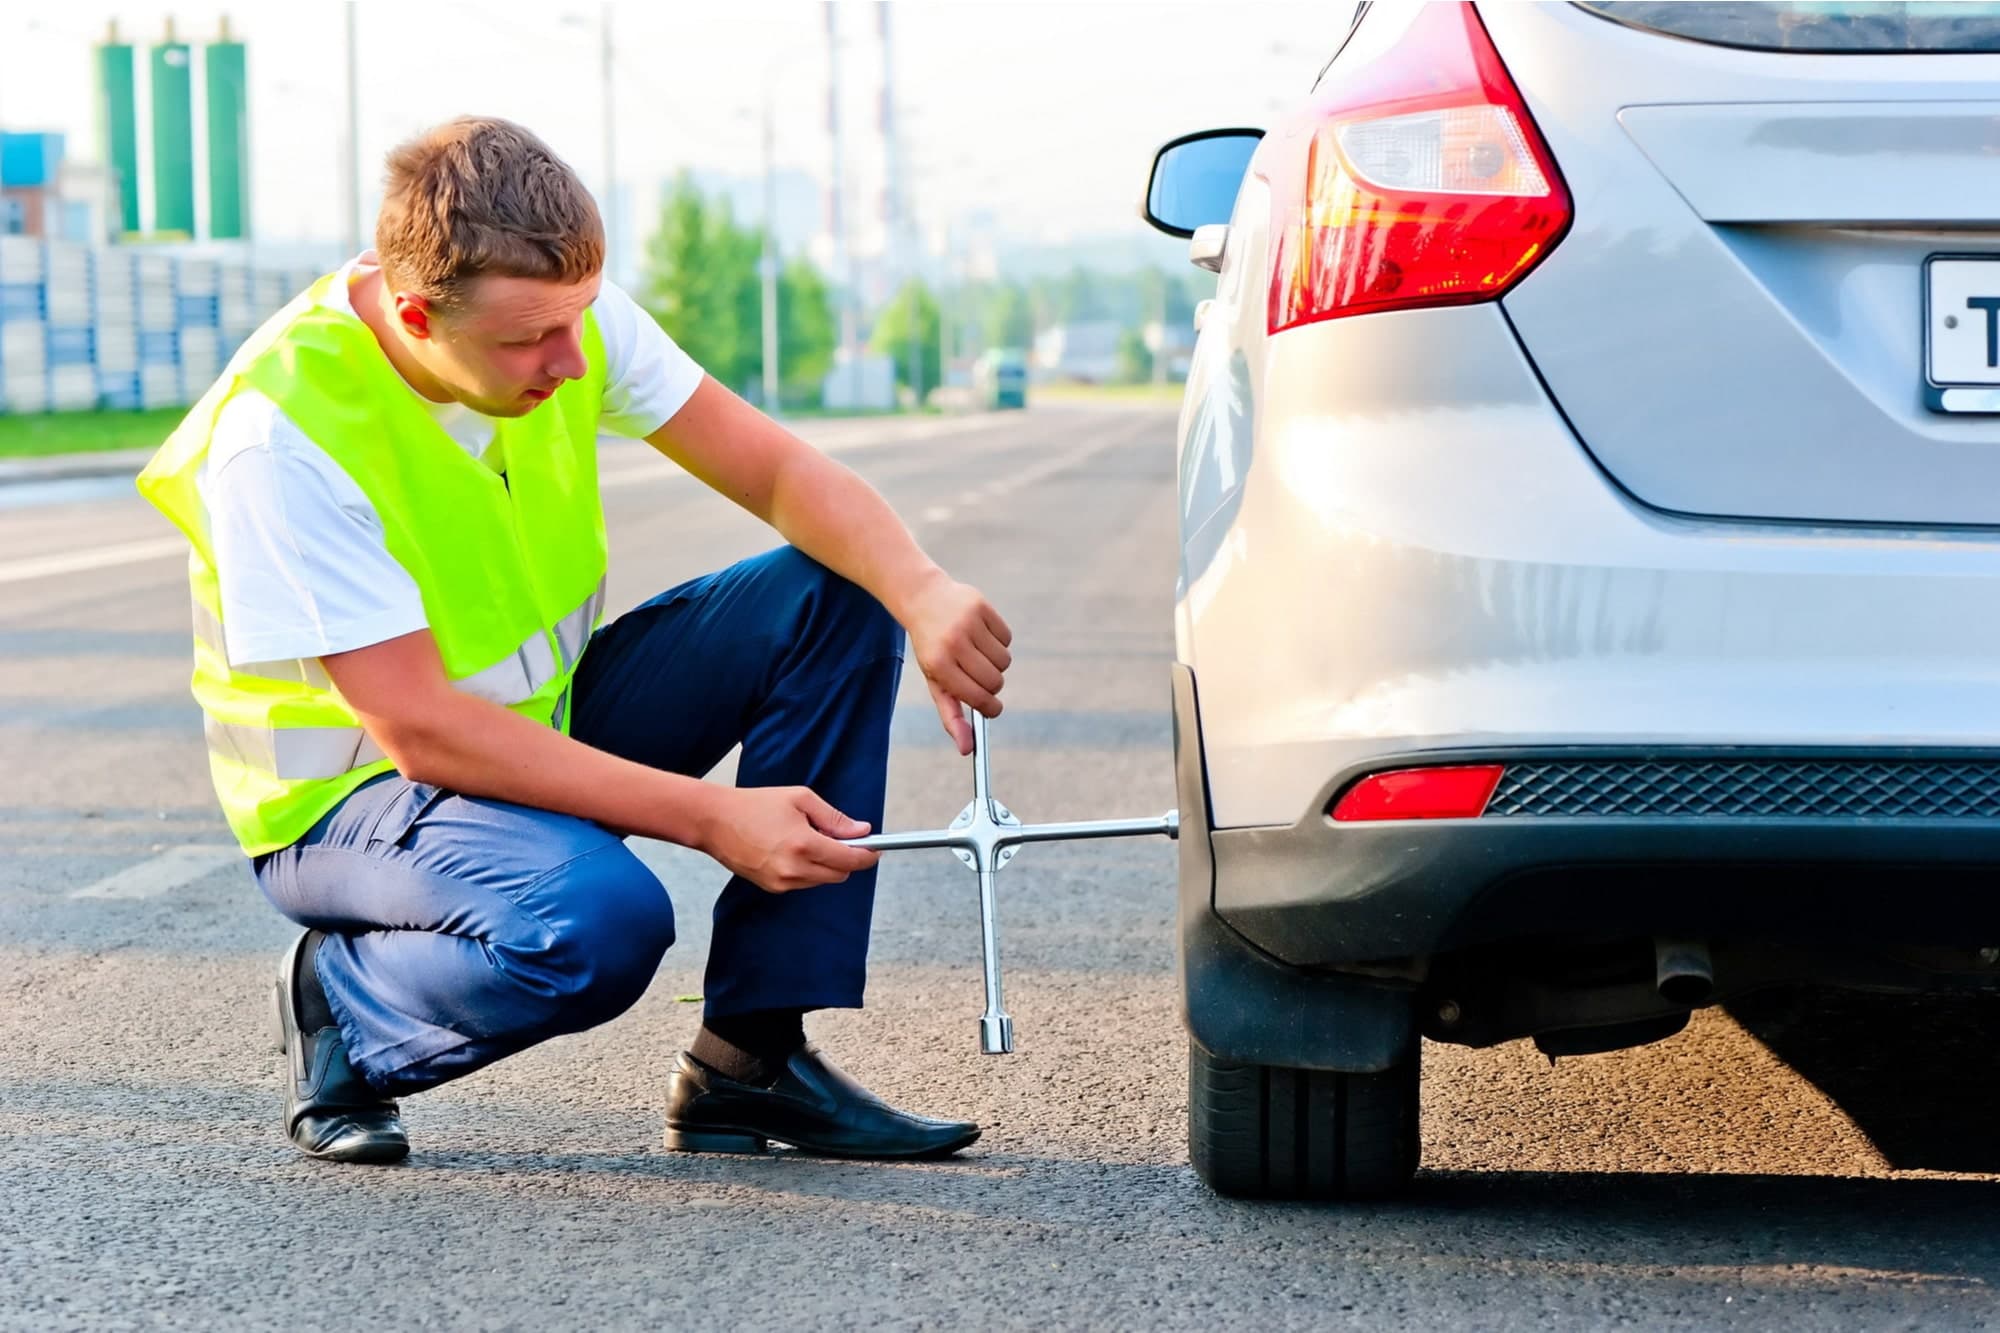 Are You Sure You Need Roadside Assistance?